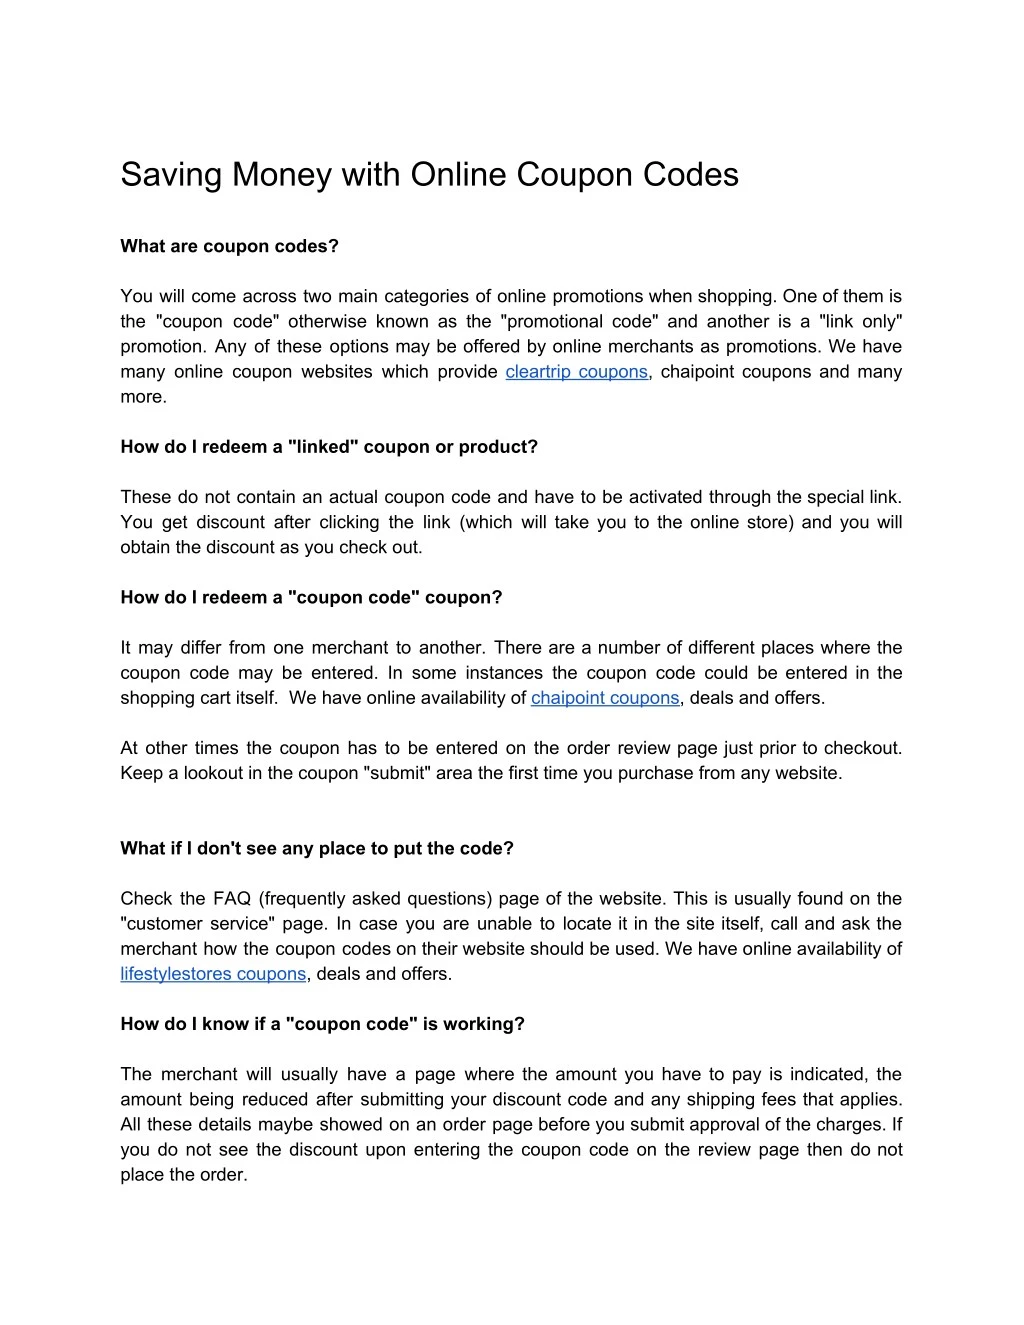 saving money with online coupon codes